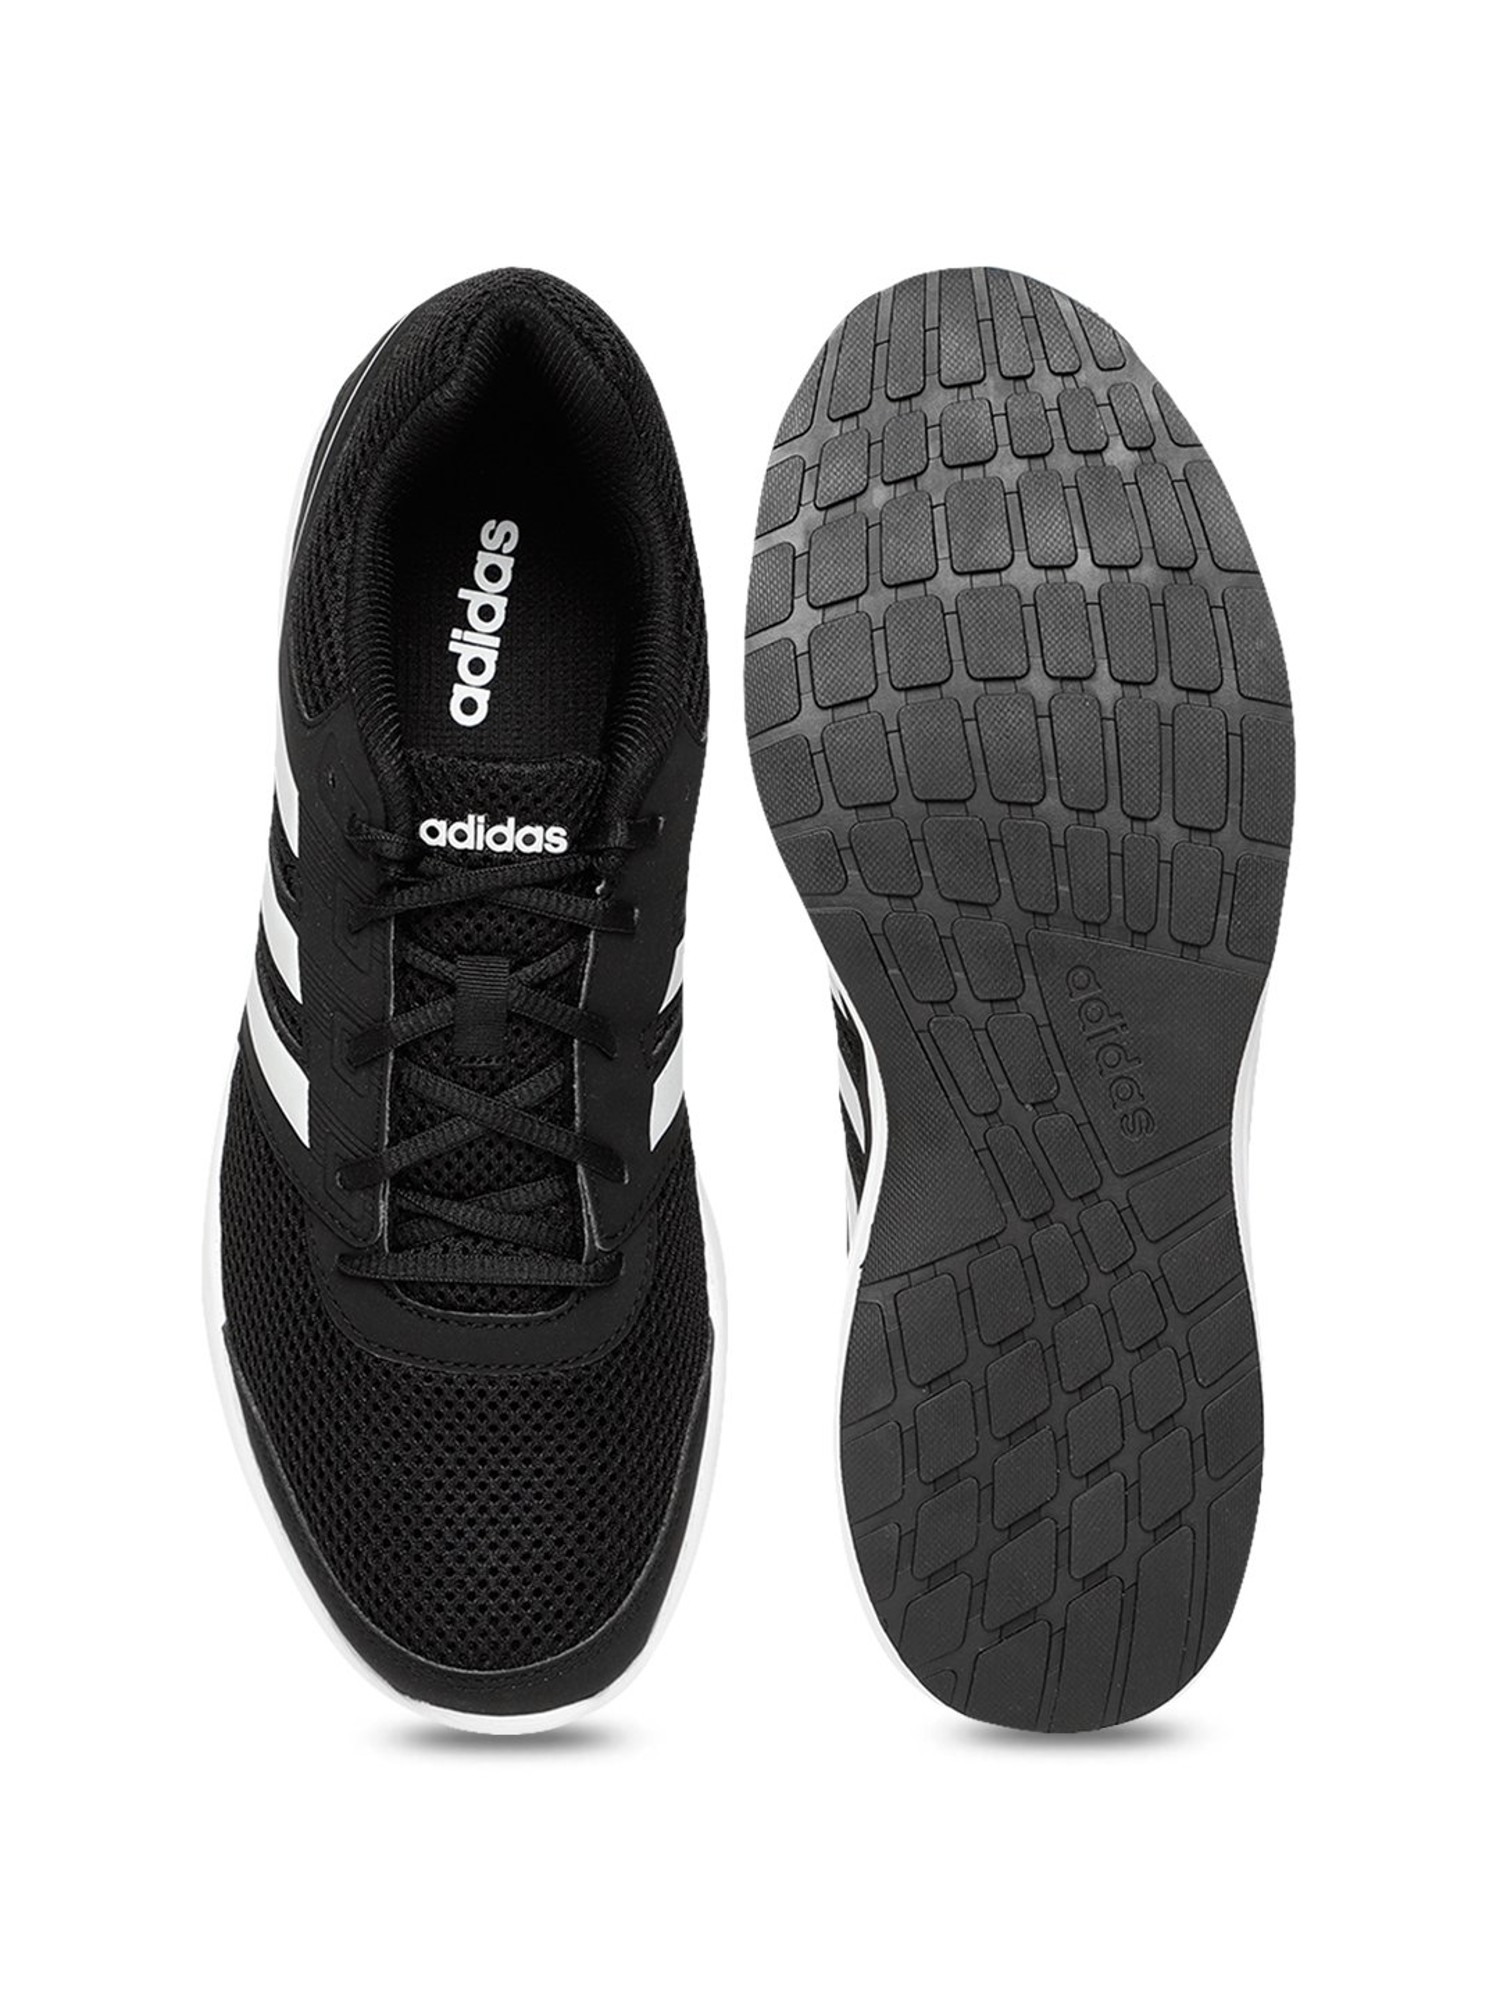 adidas hellion z review